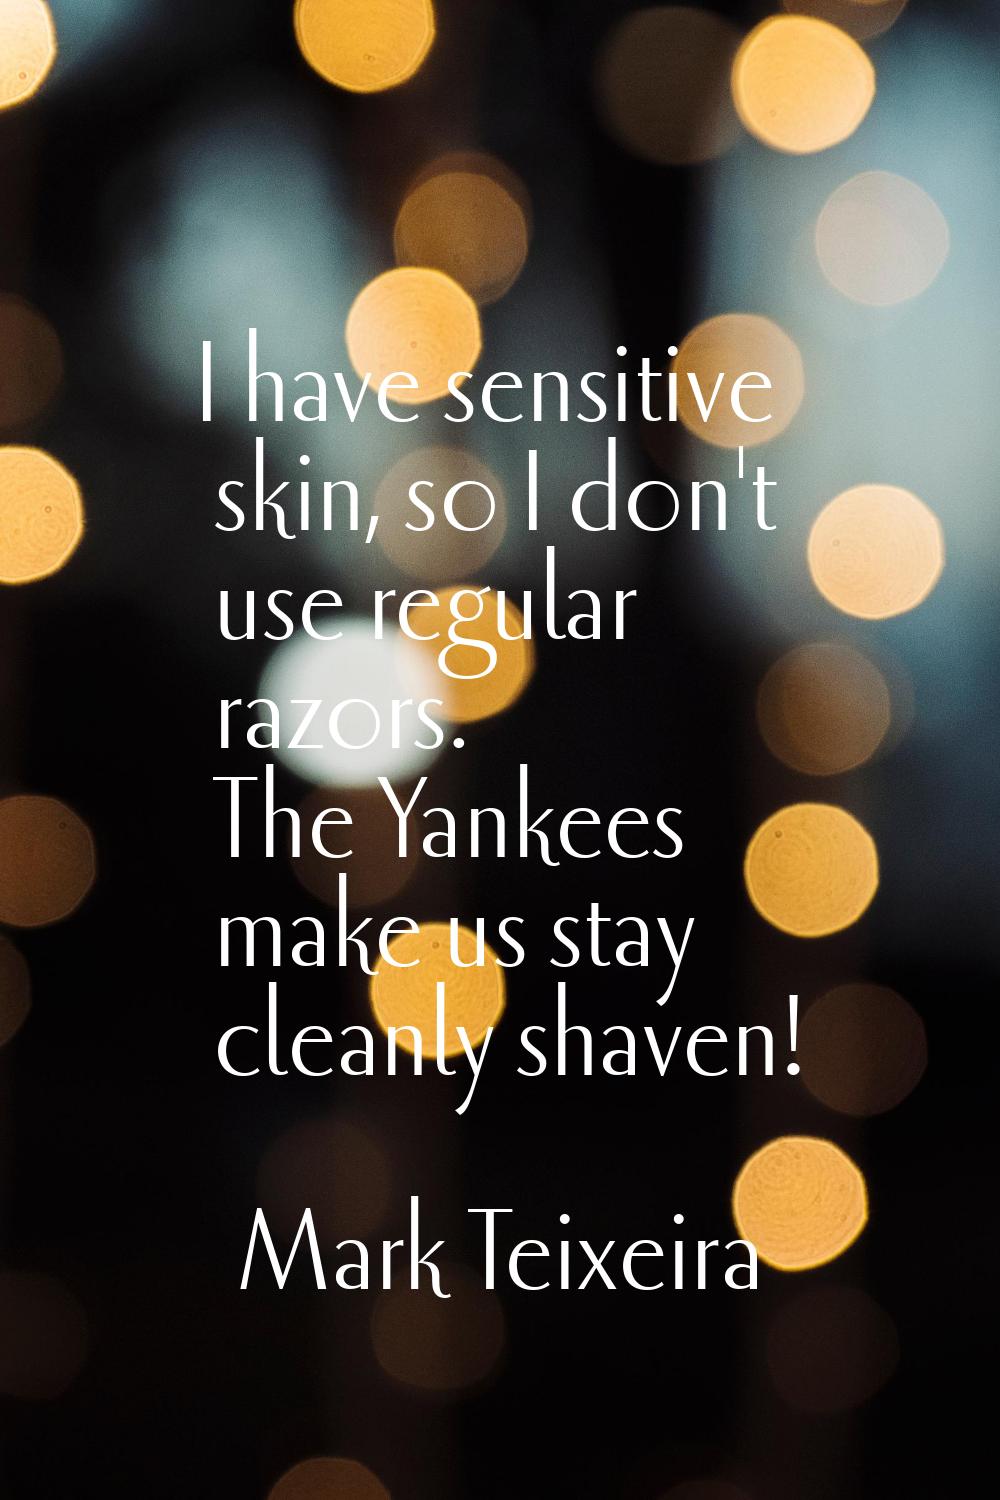 I have sensitive skin, so I don't use regular razors. The Yankees make us stay cleanly shaven!